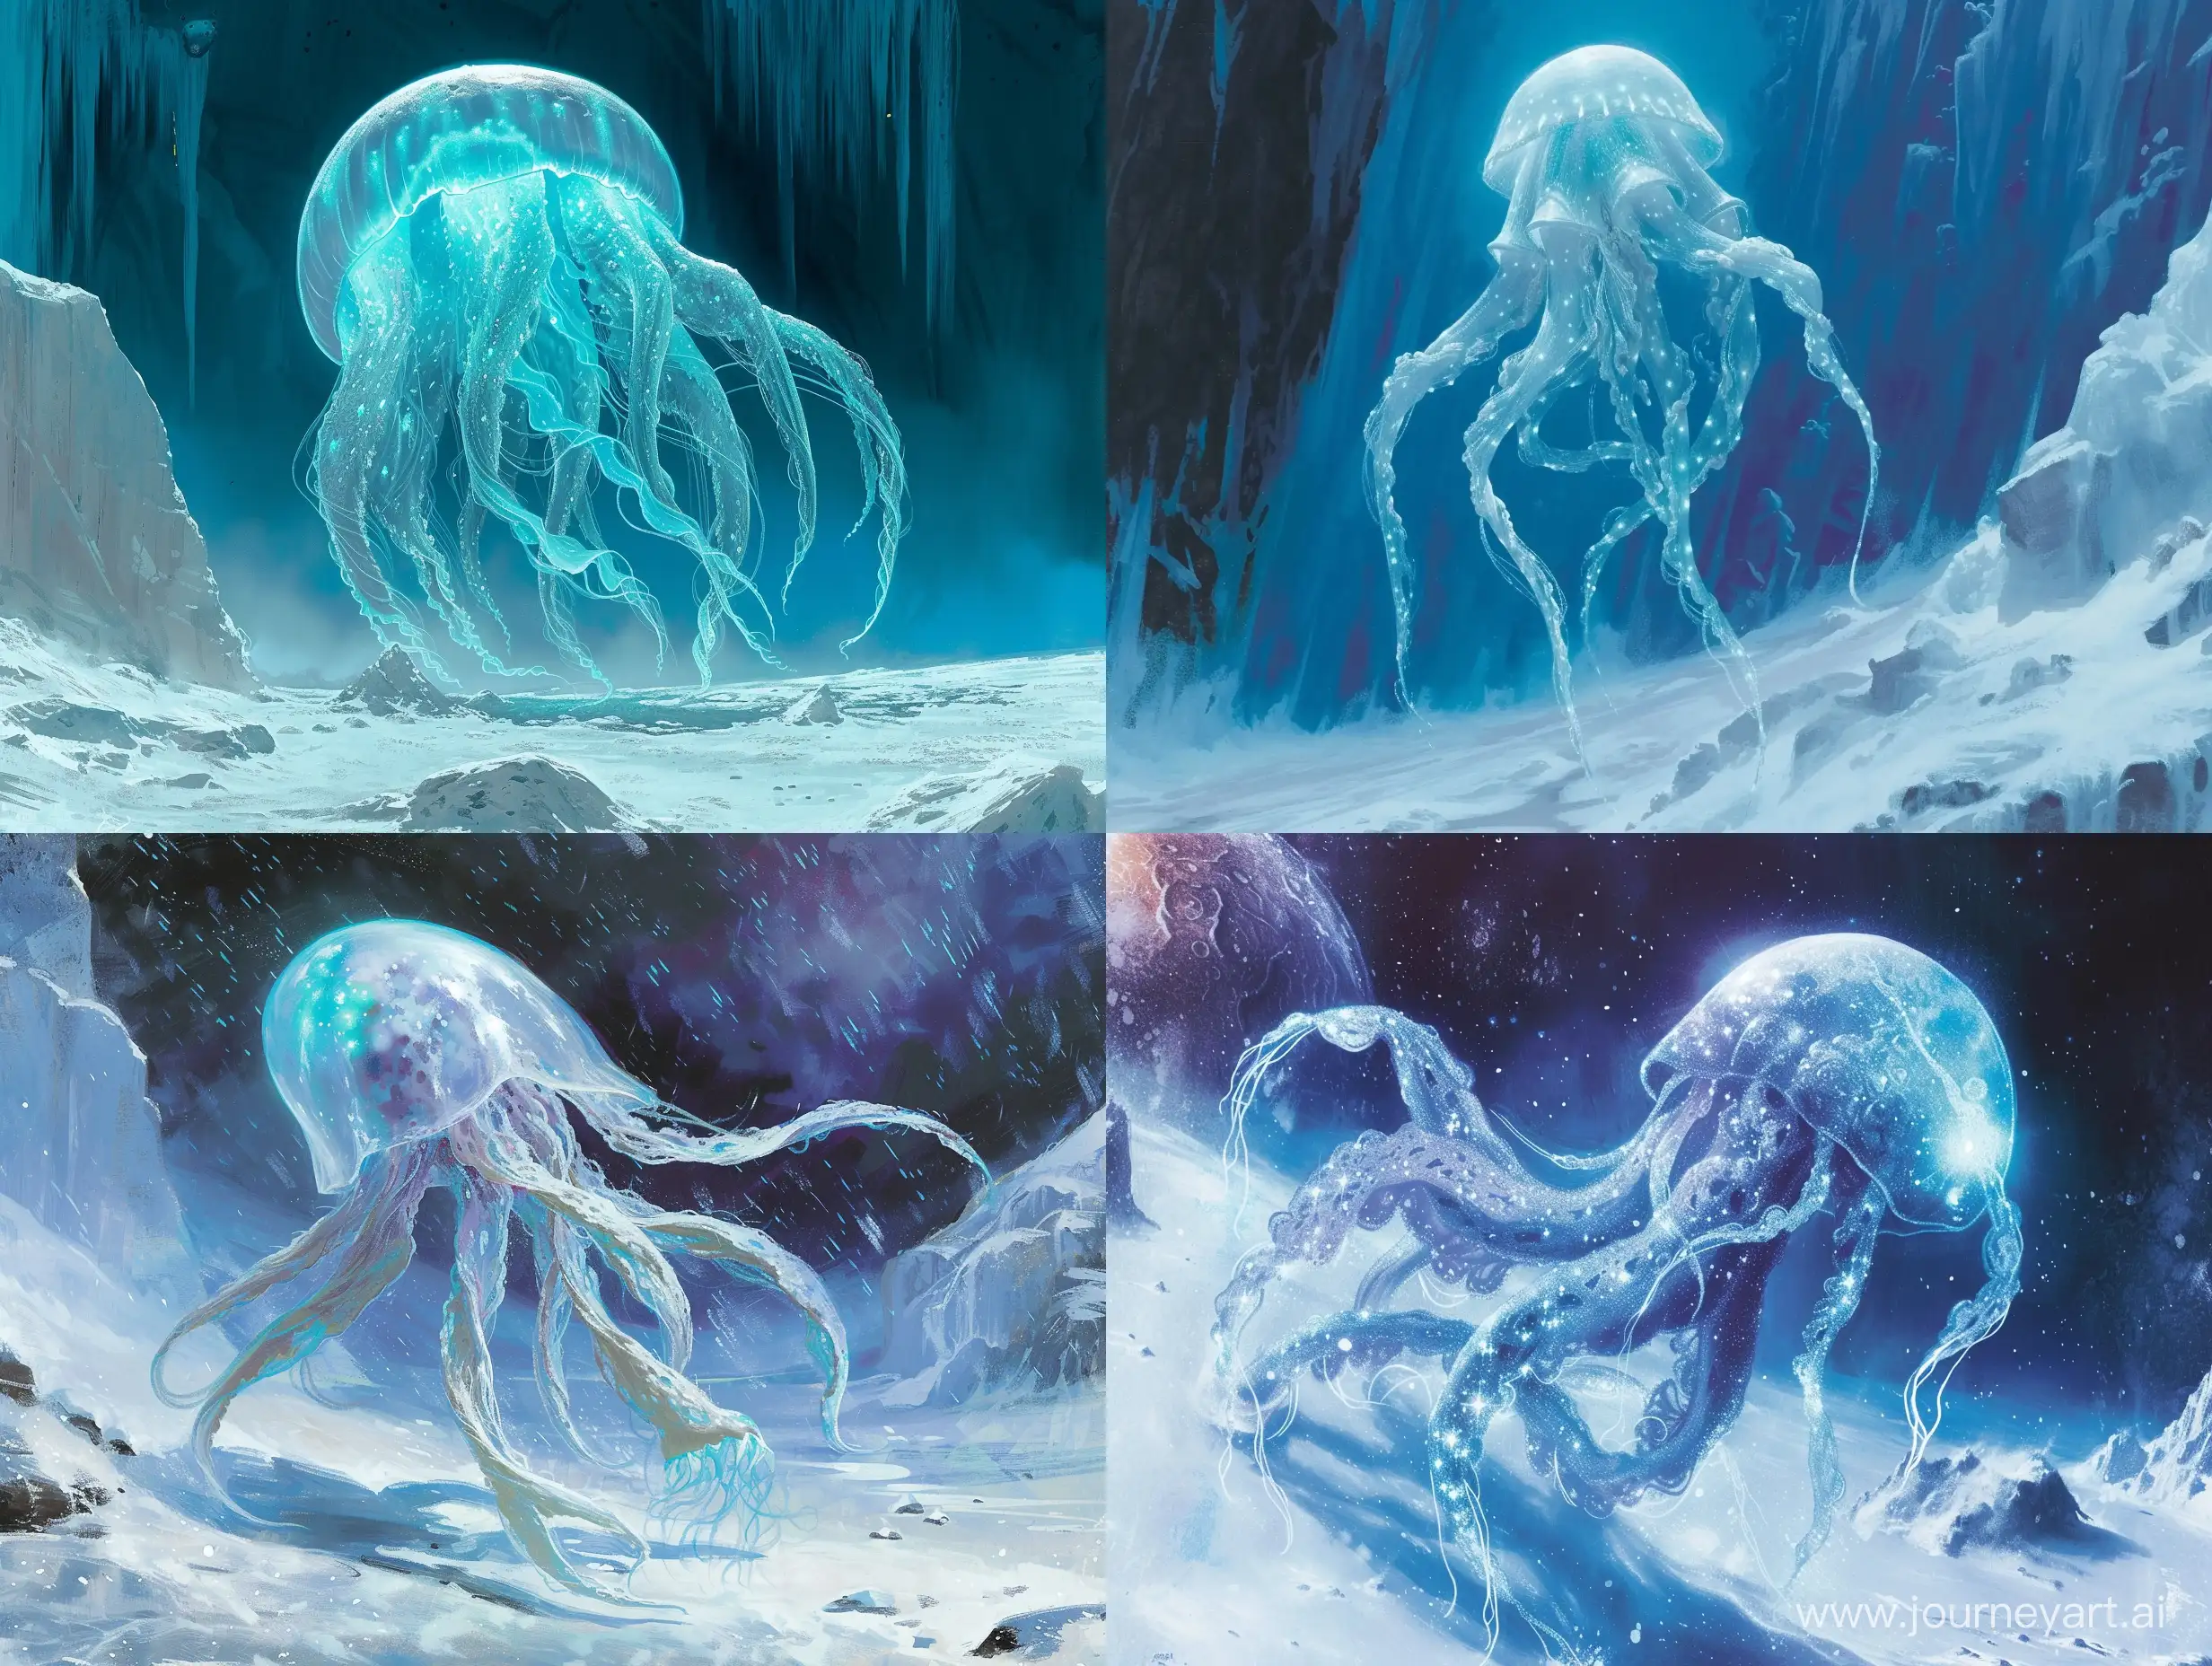 a bioluminescent otherworldly alien creature that is like a cross between a jellyfish and cuttlefish being encountered  in the icy oceans of Europa. painted in the style of Ralph McQuarrie. cold colors.  retro science fiction style.